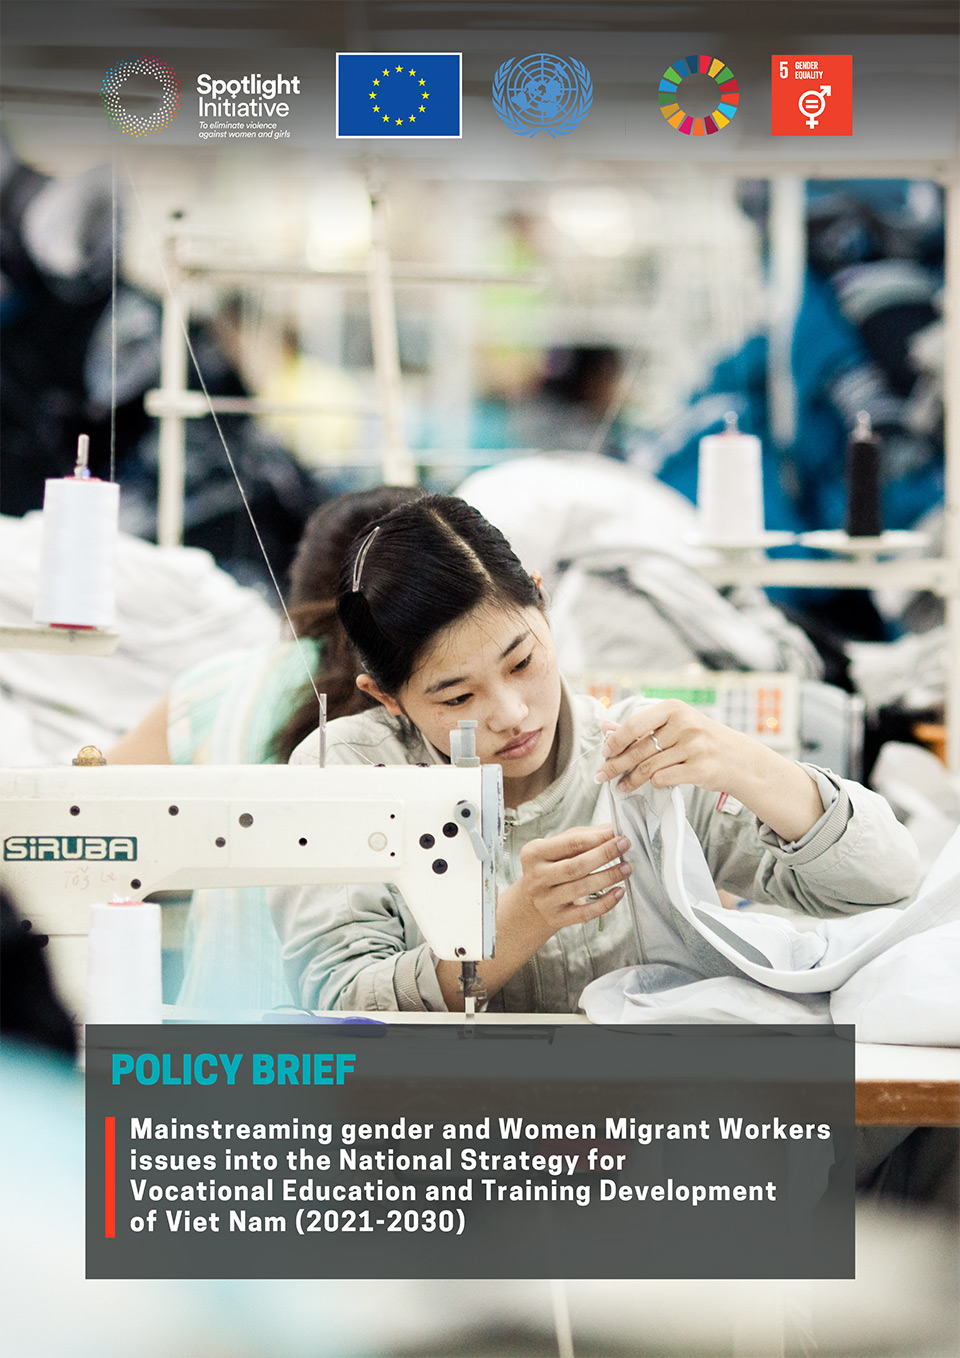 Policy brief and comments on mainstreaming gender/Women Migrant Workers issues